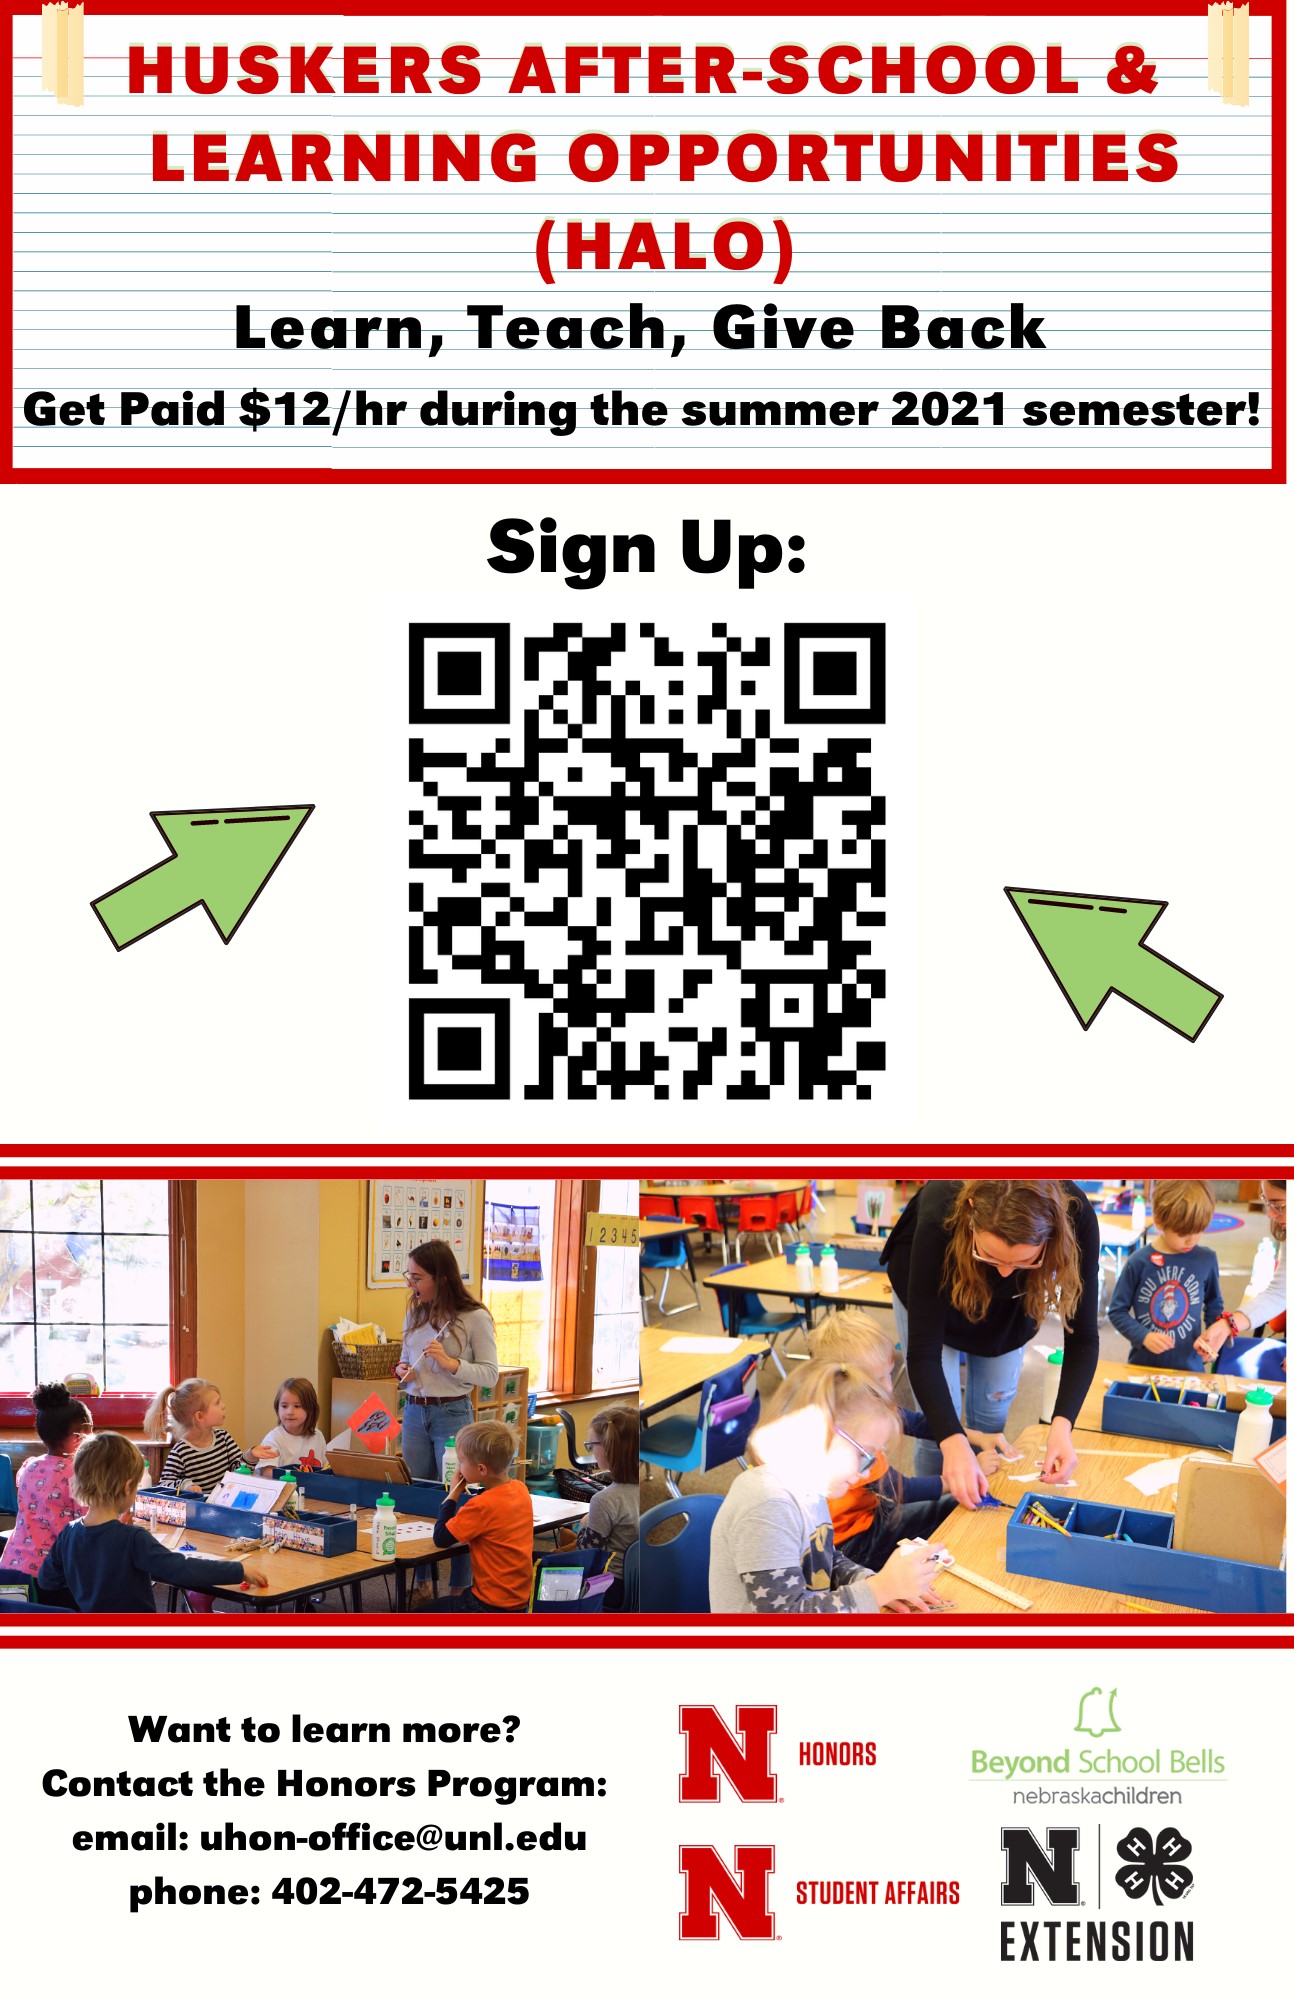 Huskers After-School and Summer Learning Opportunities